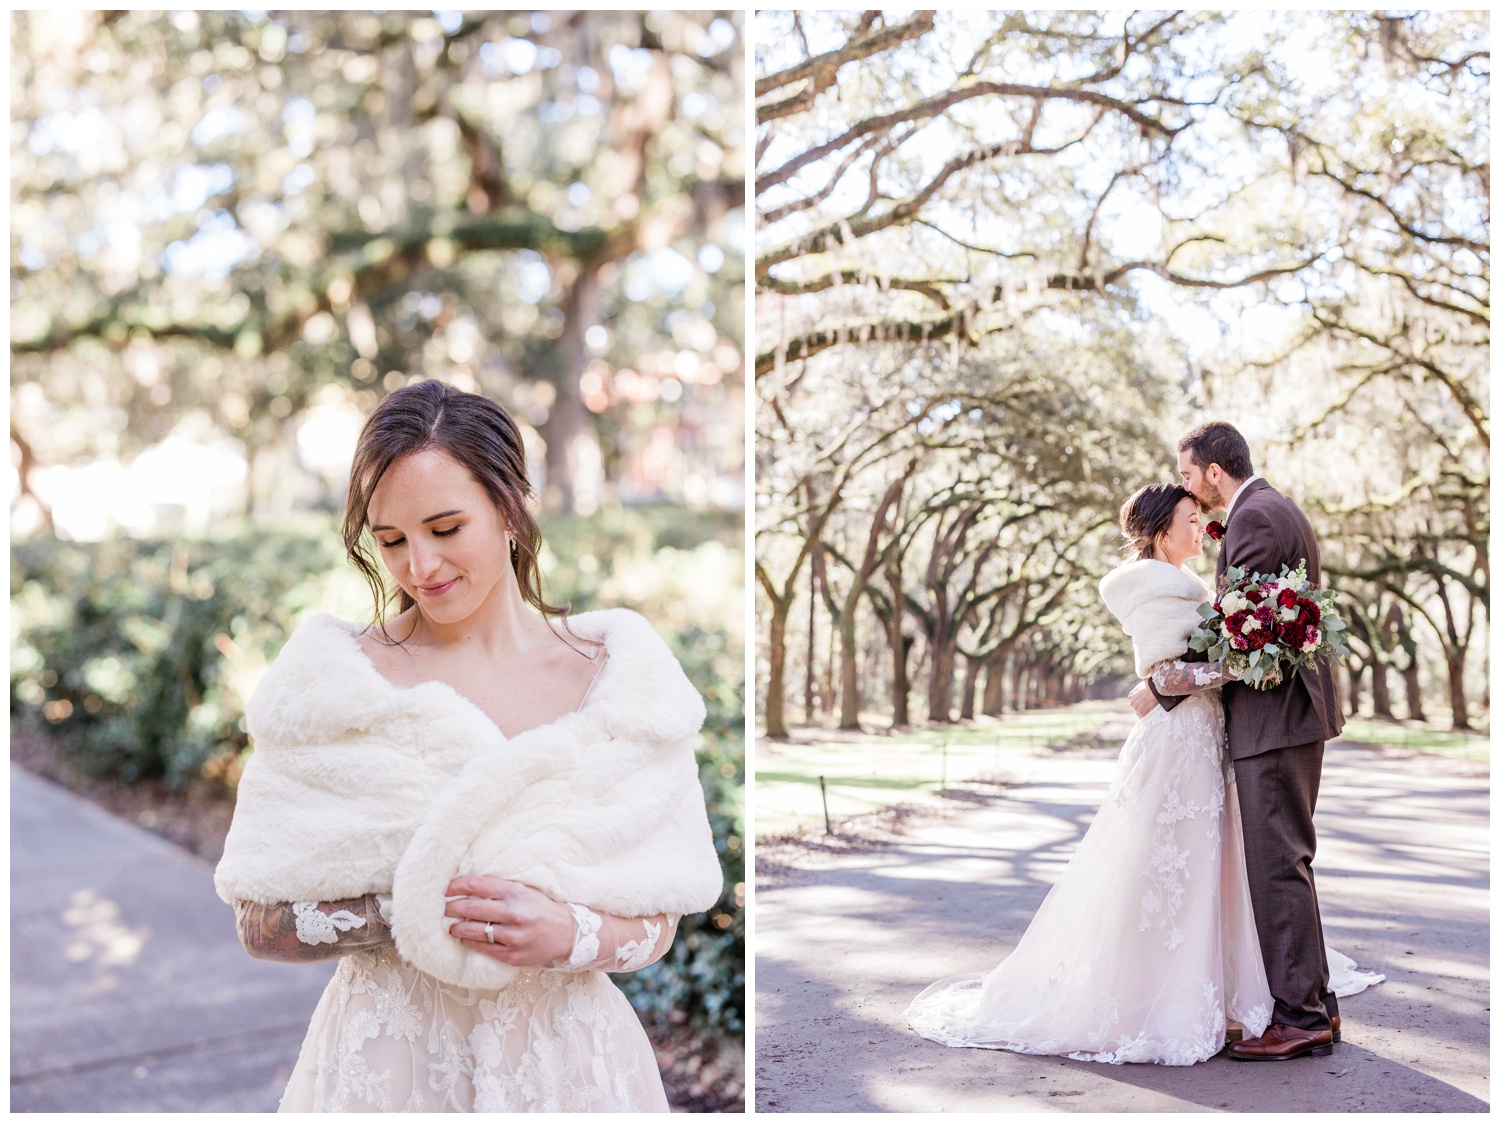 wear a warm wrap to stay warm - the savannah elopement package